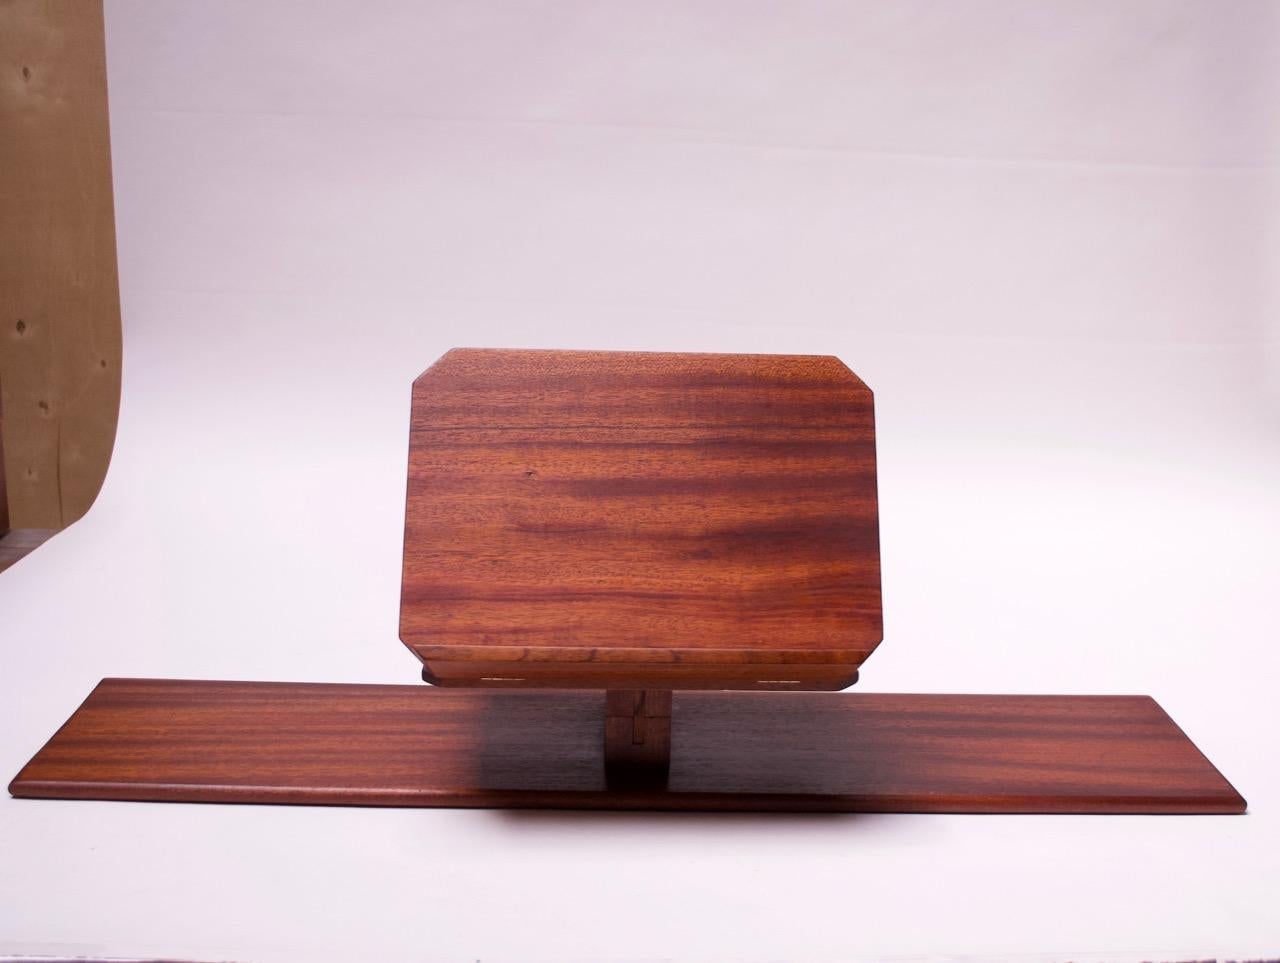 Ingeniously designed lectern composed of two pieces: a base board with two pedestals and a stand, all in solid mahogany. The stand can attach to one of the two cruciform pedestals (depending on preferred height). The hinged stand is easily removable